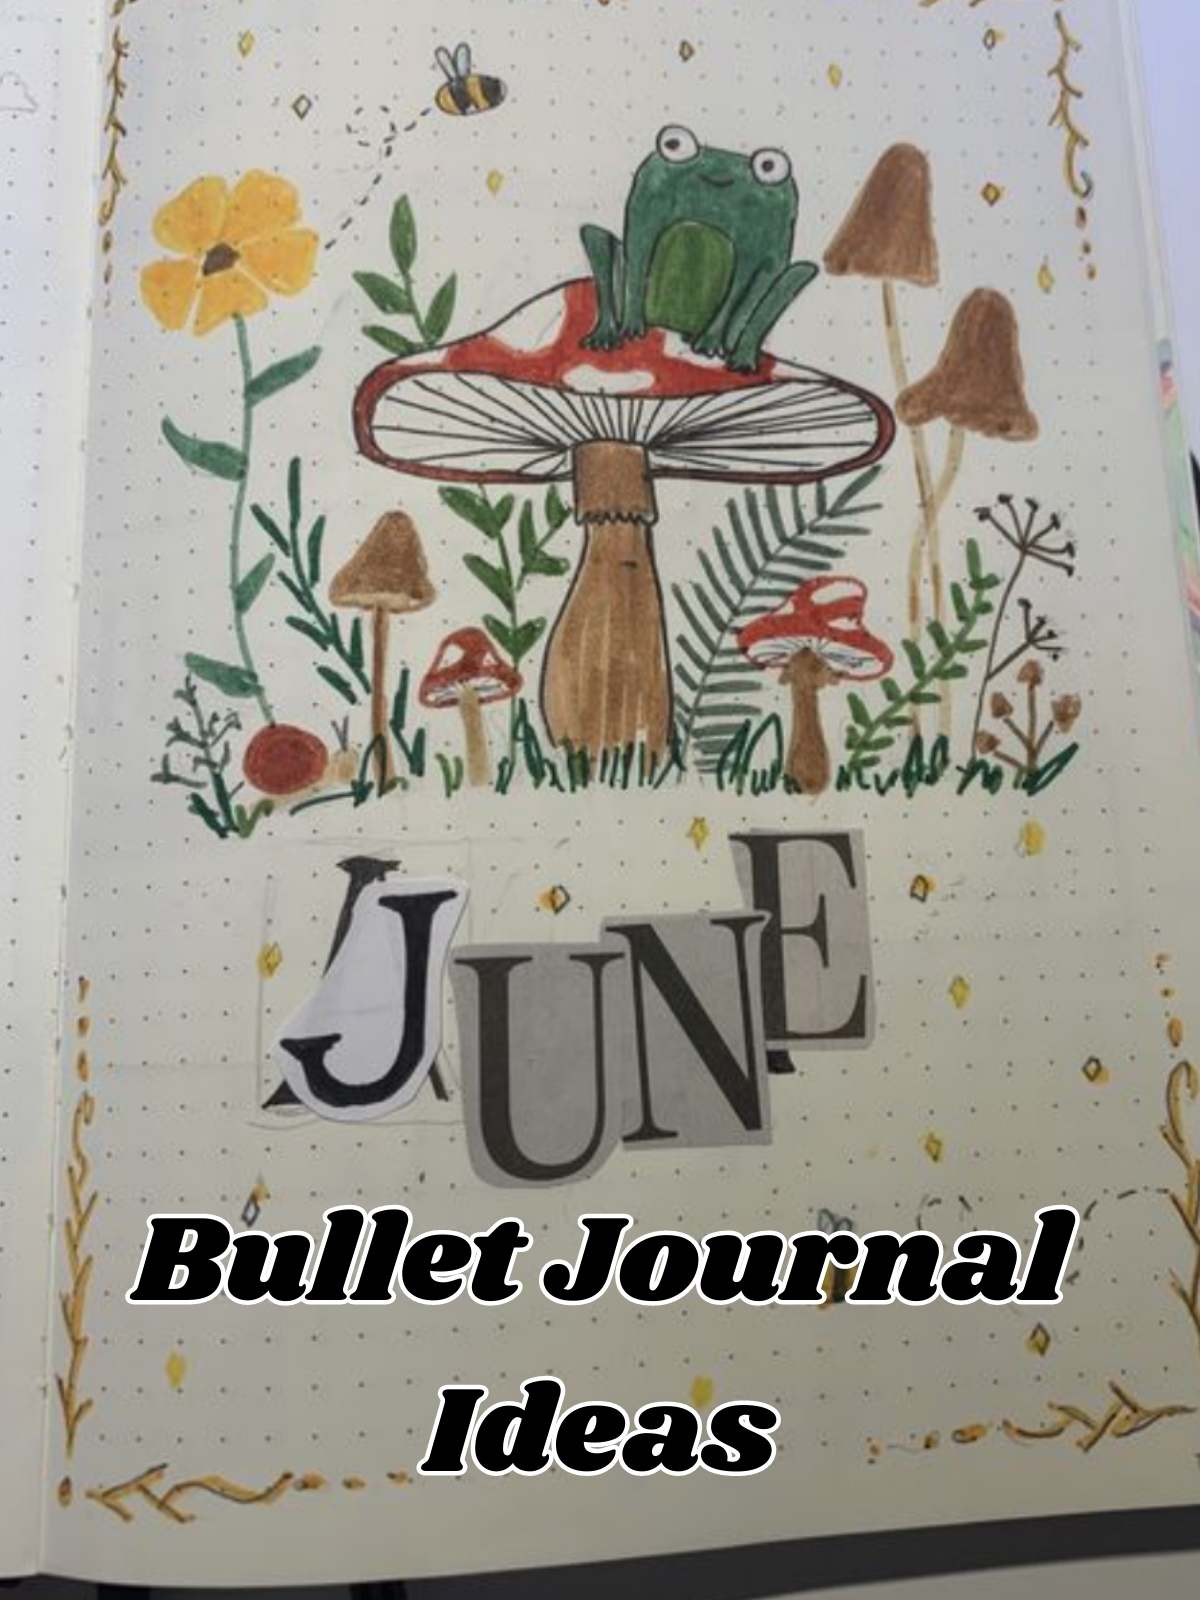 June Bullet Journal Ideas. Photo of journal with mushrooms and flowers.